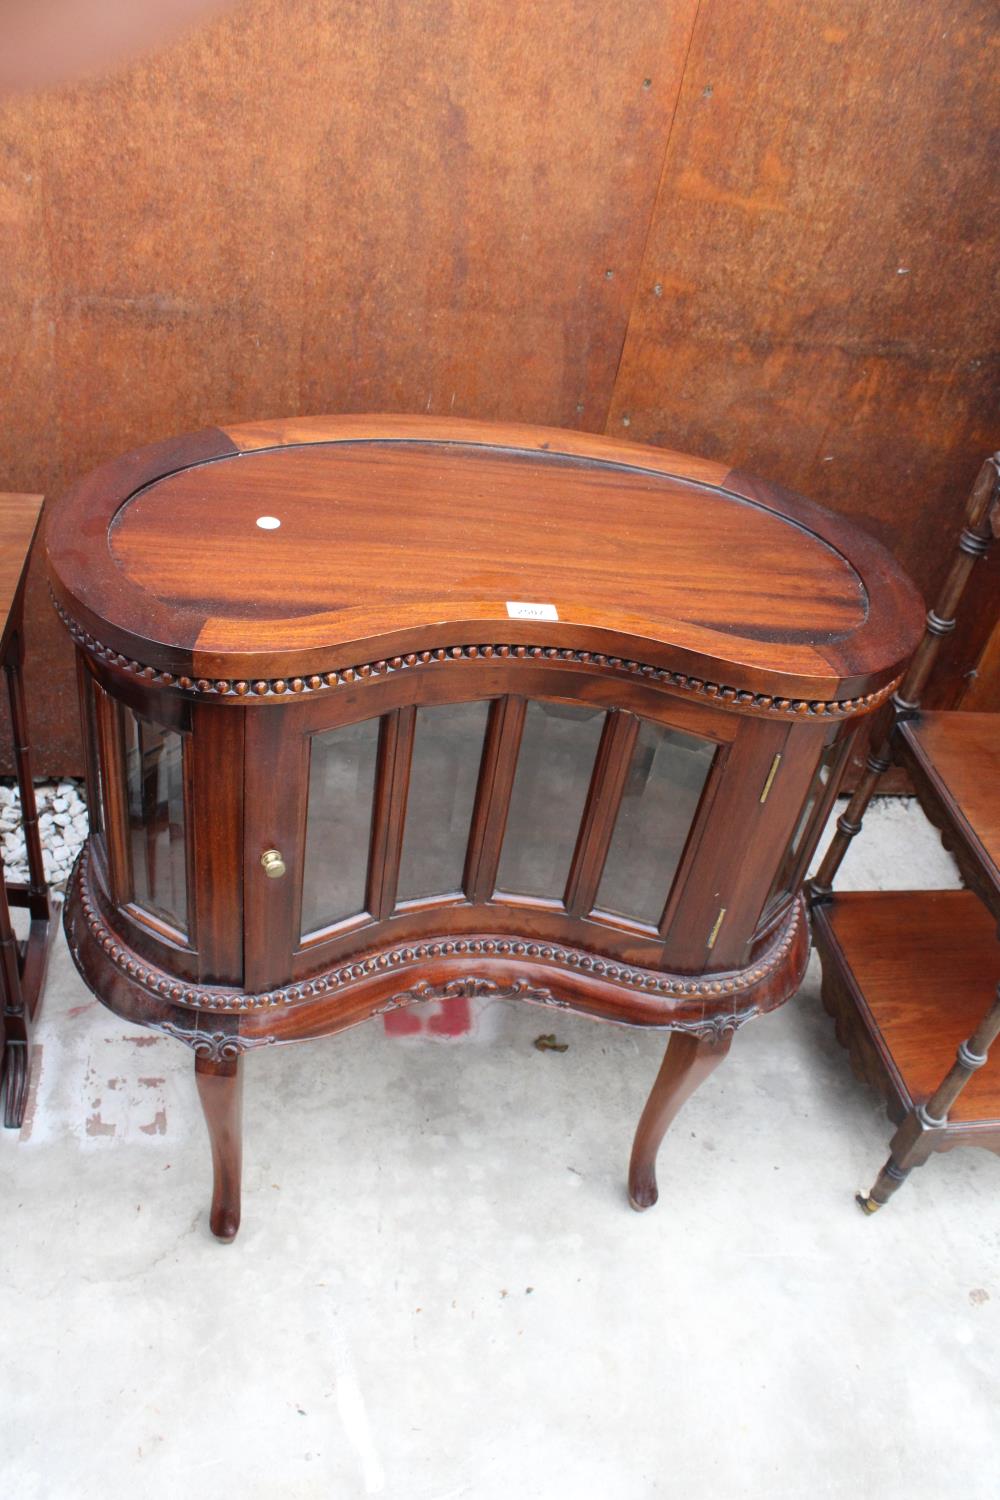 A VICTORIAN STYLE HARDWOOD KIDNEY SHAPED DRINKS CABINET WITH DETACHABLE TRAY